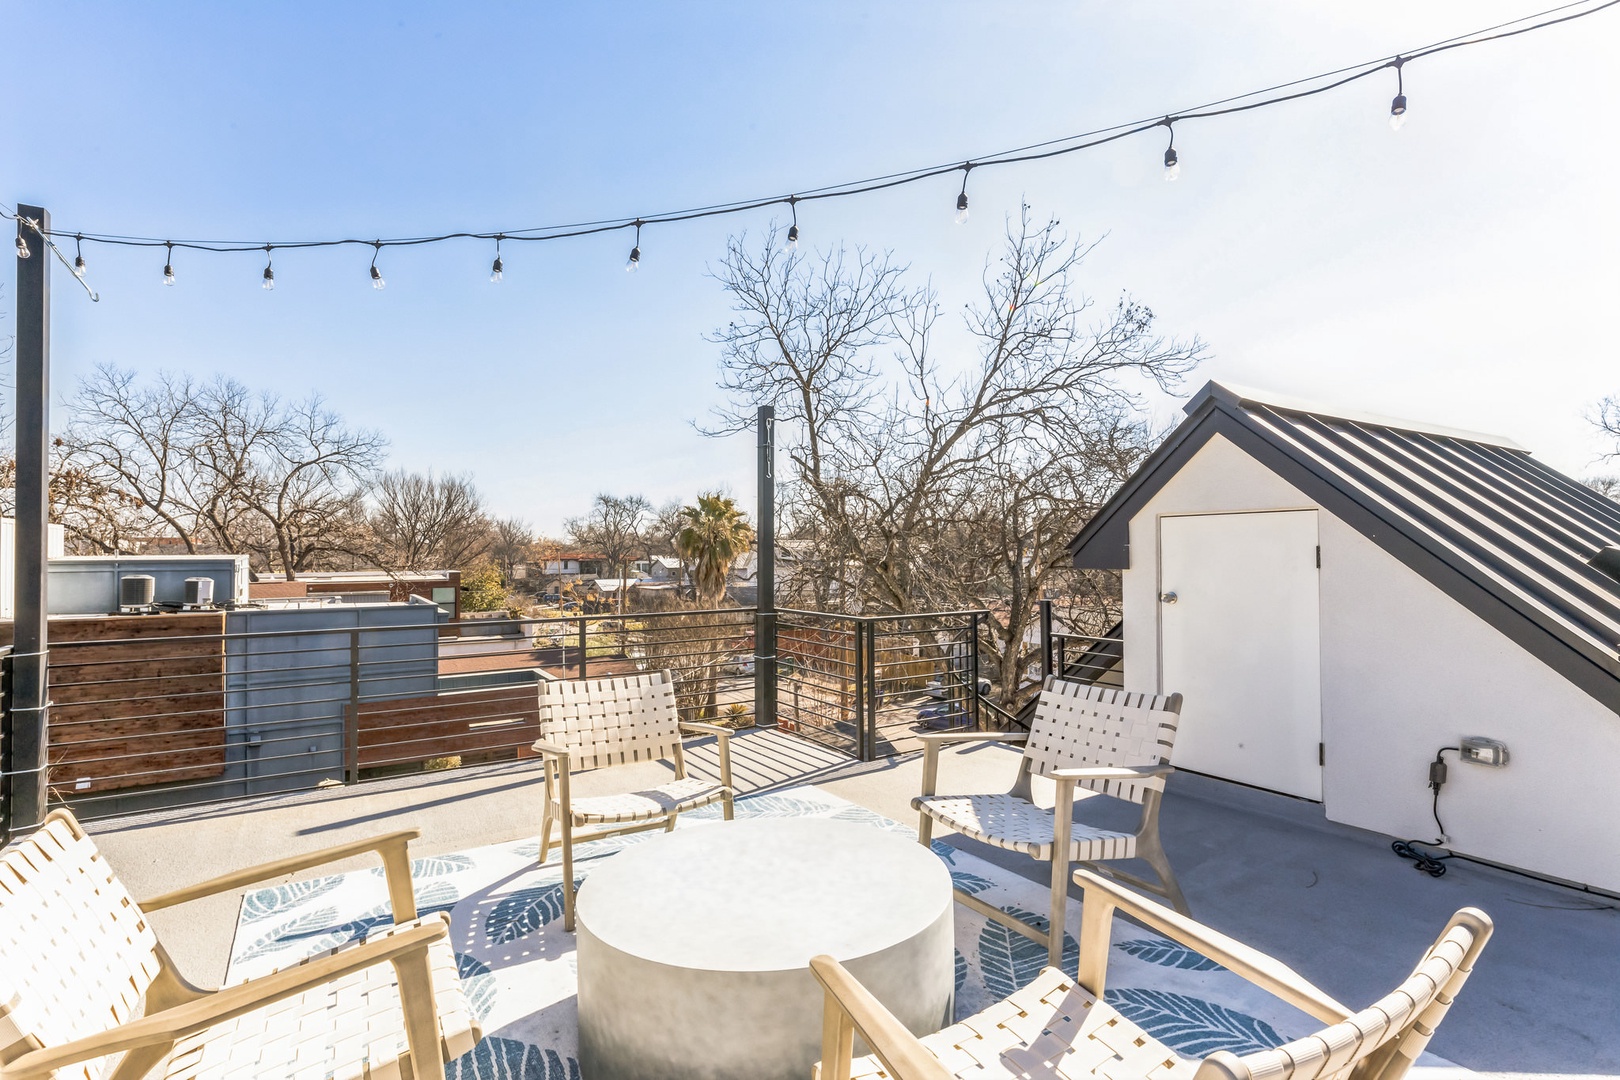 Rooftop deck with seating area